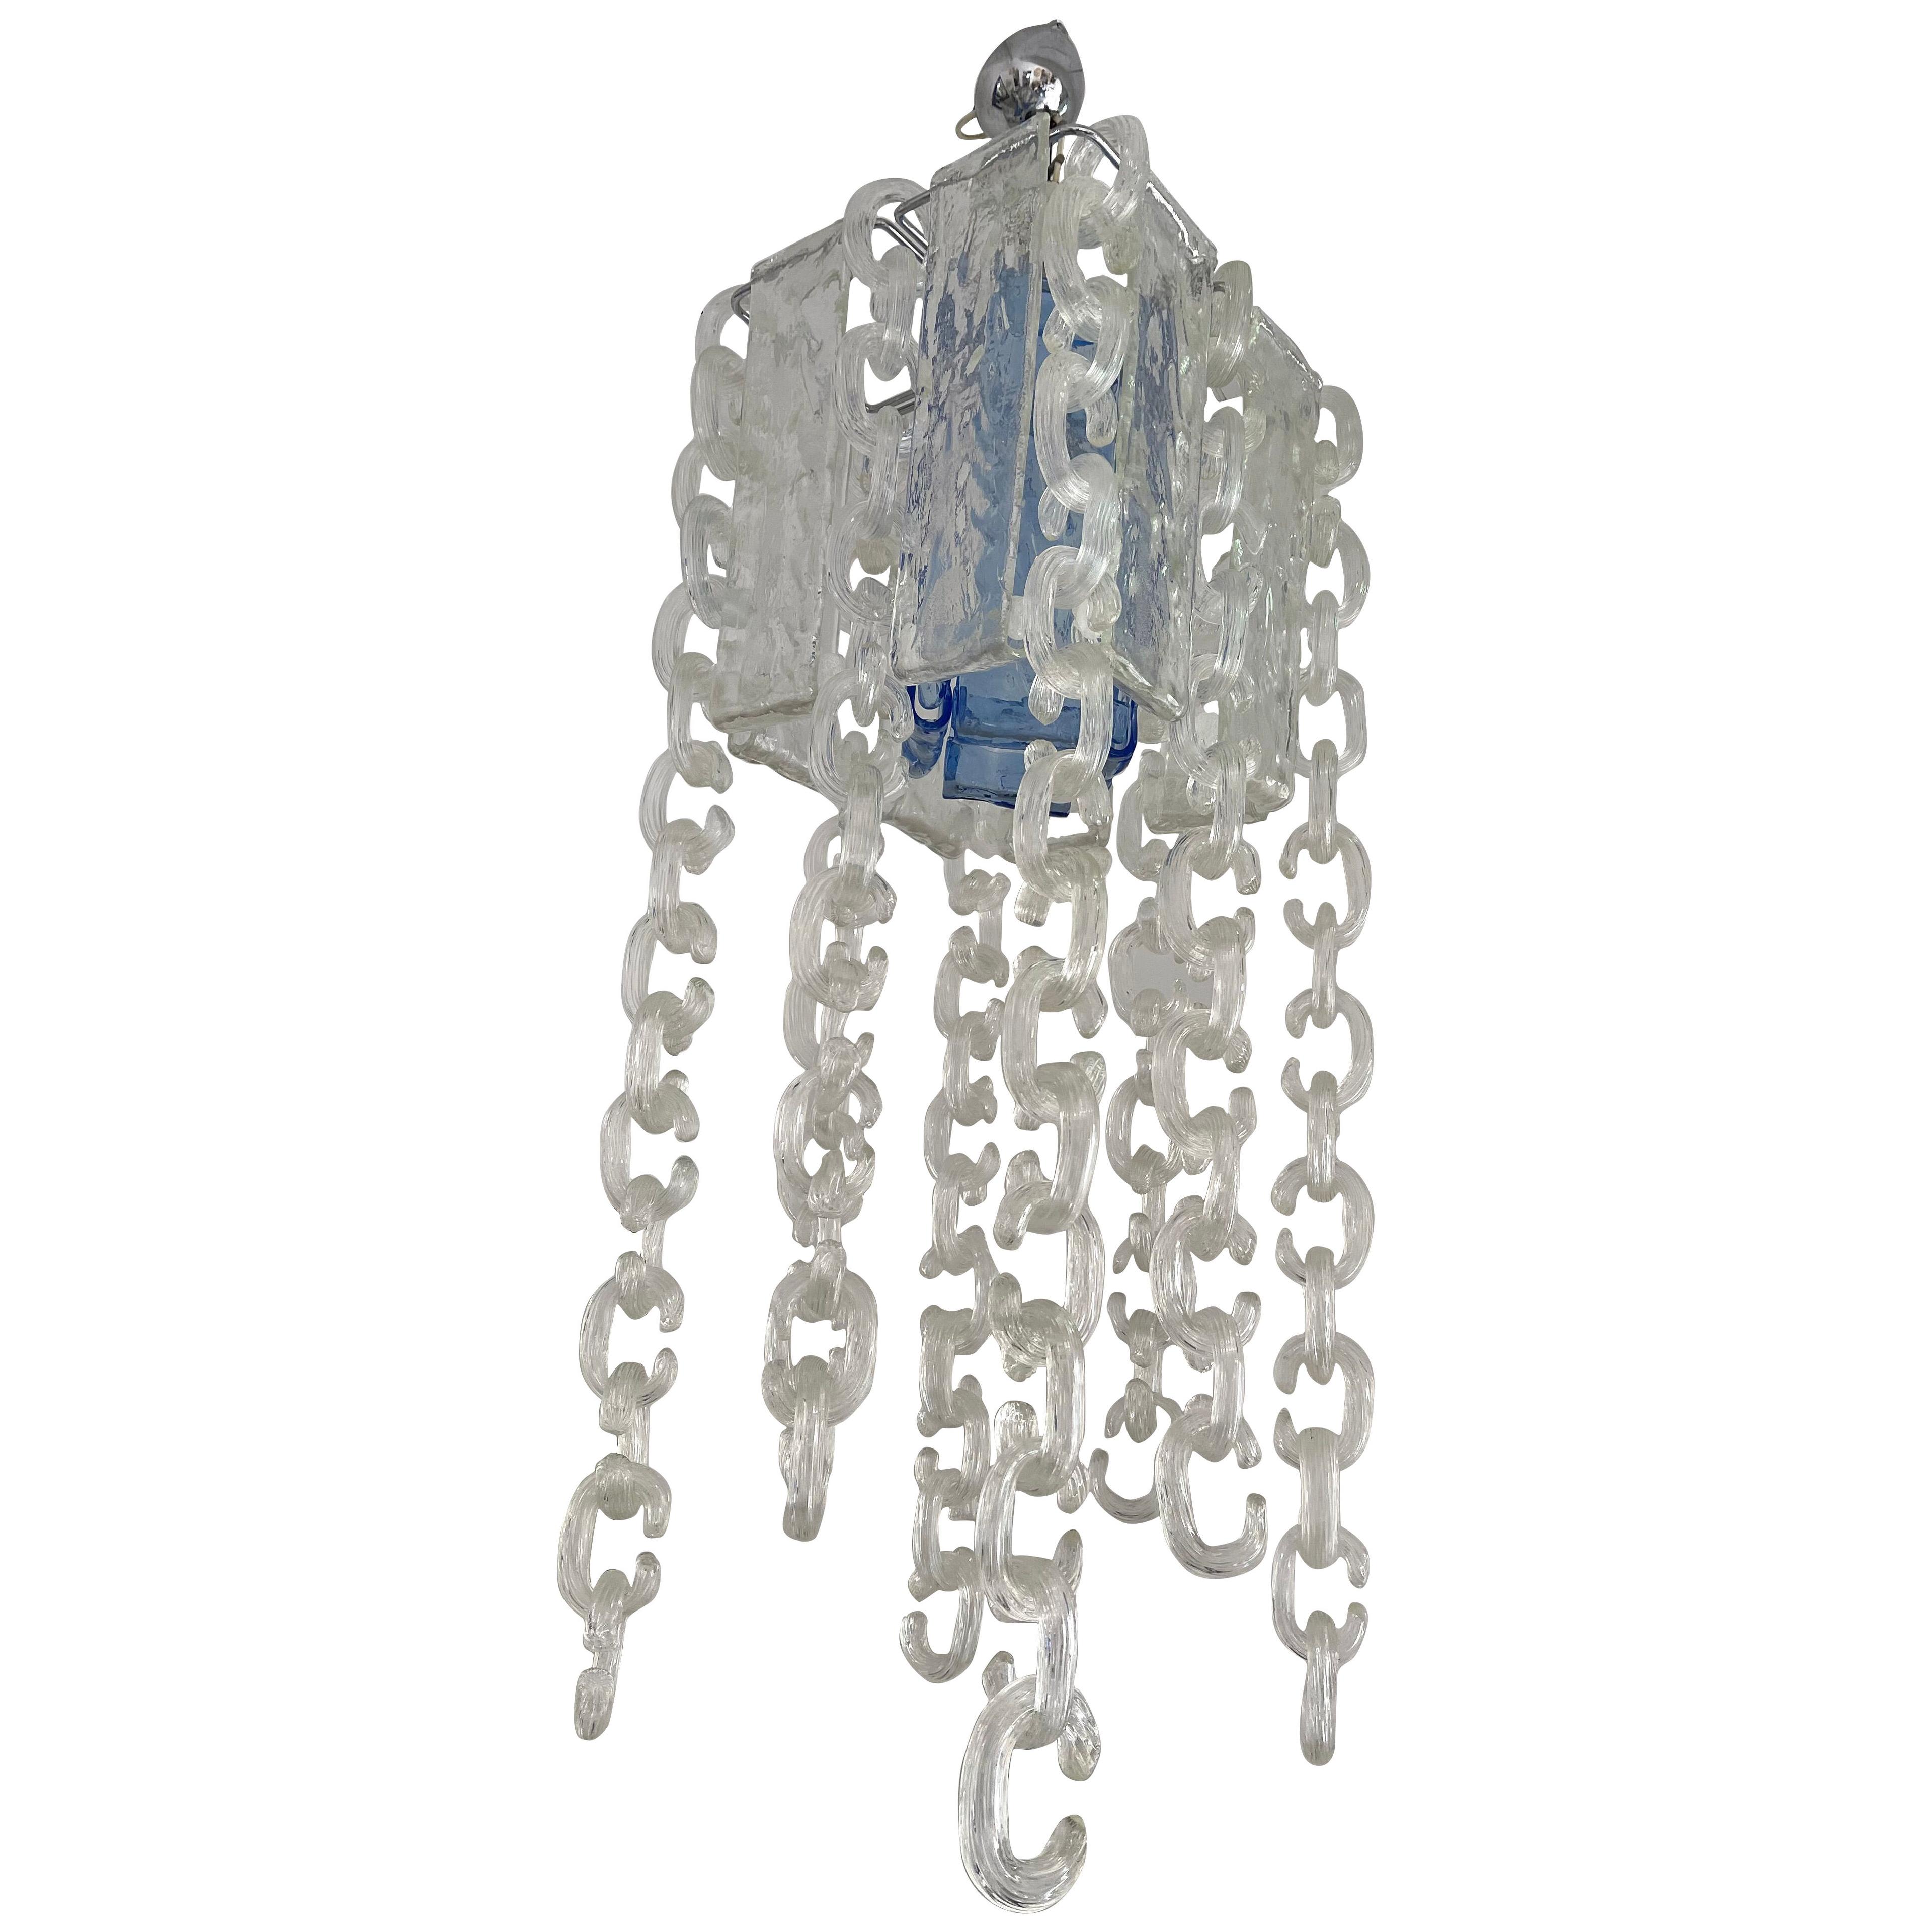 Chandelier Chain Murano Glass Metal by Fratelli Toso. Italy, 1970s